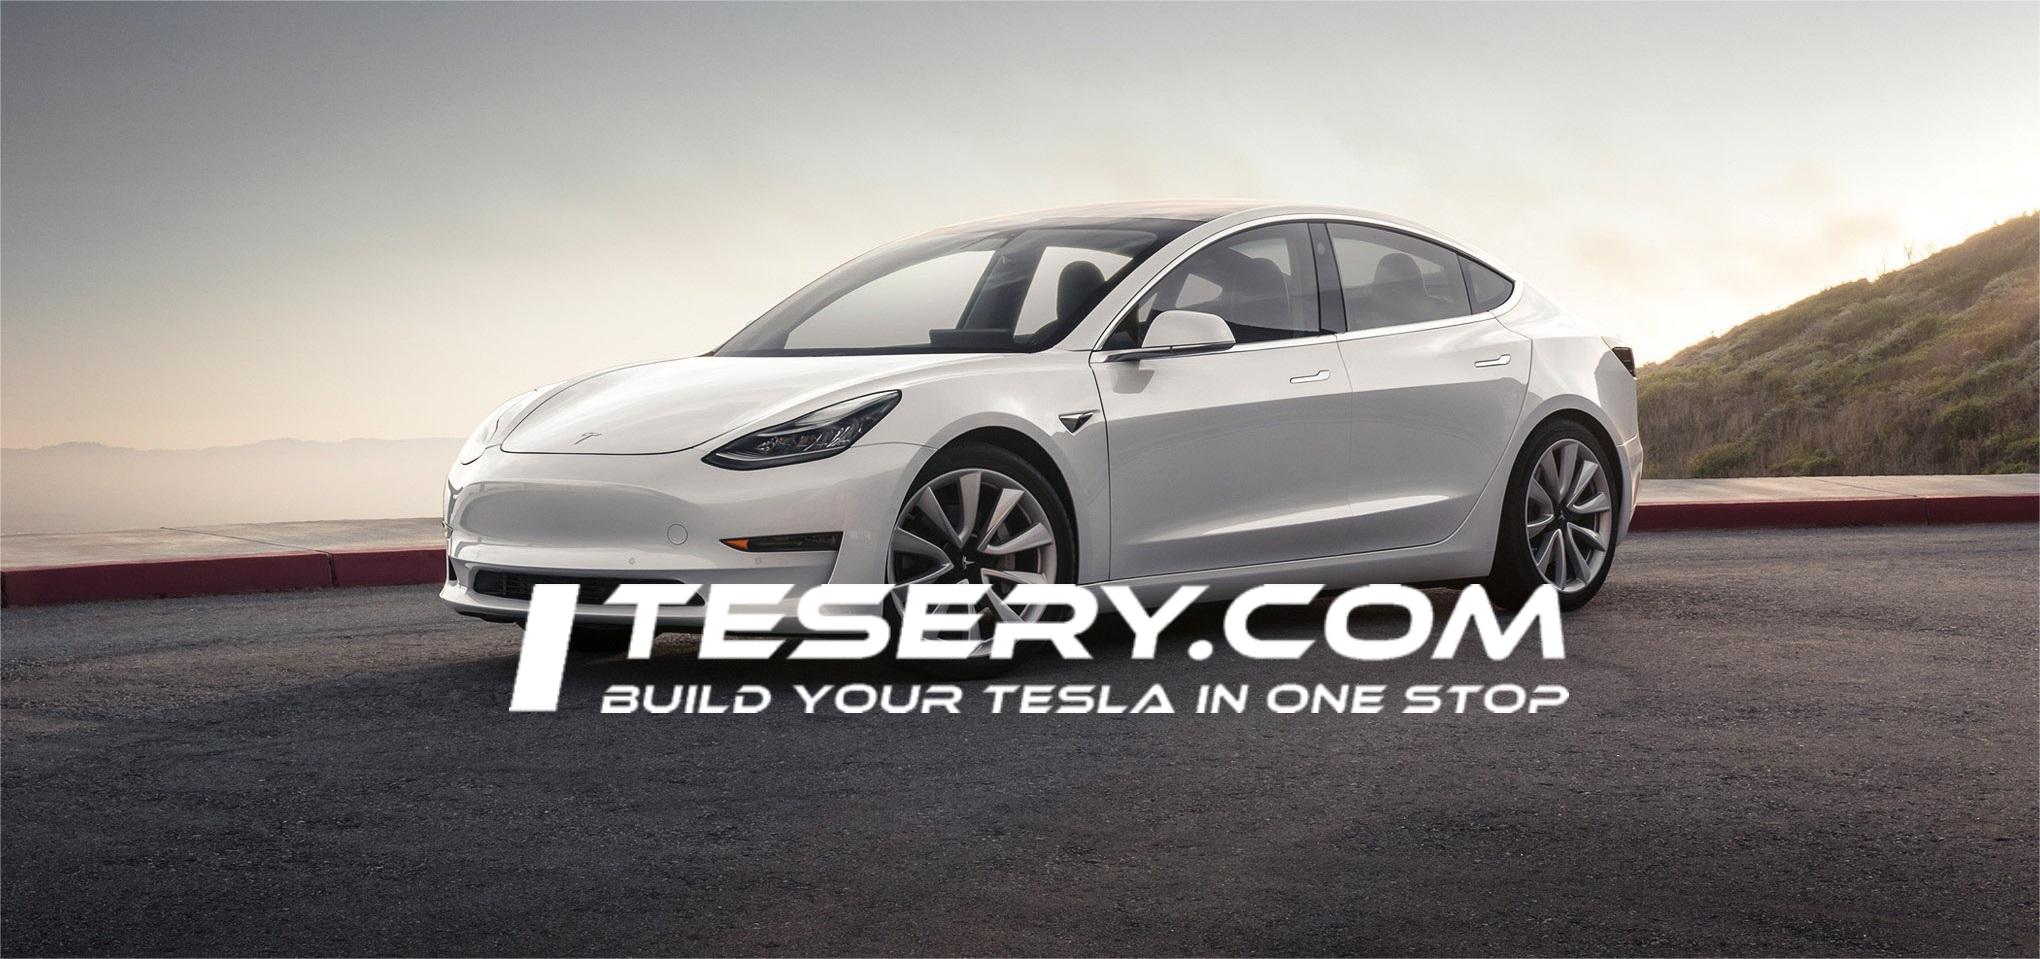 Enhance Your Tesla Model 3: Top Product Modifications for Improved Performance - Tesery Official Store